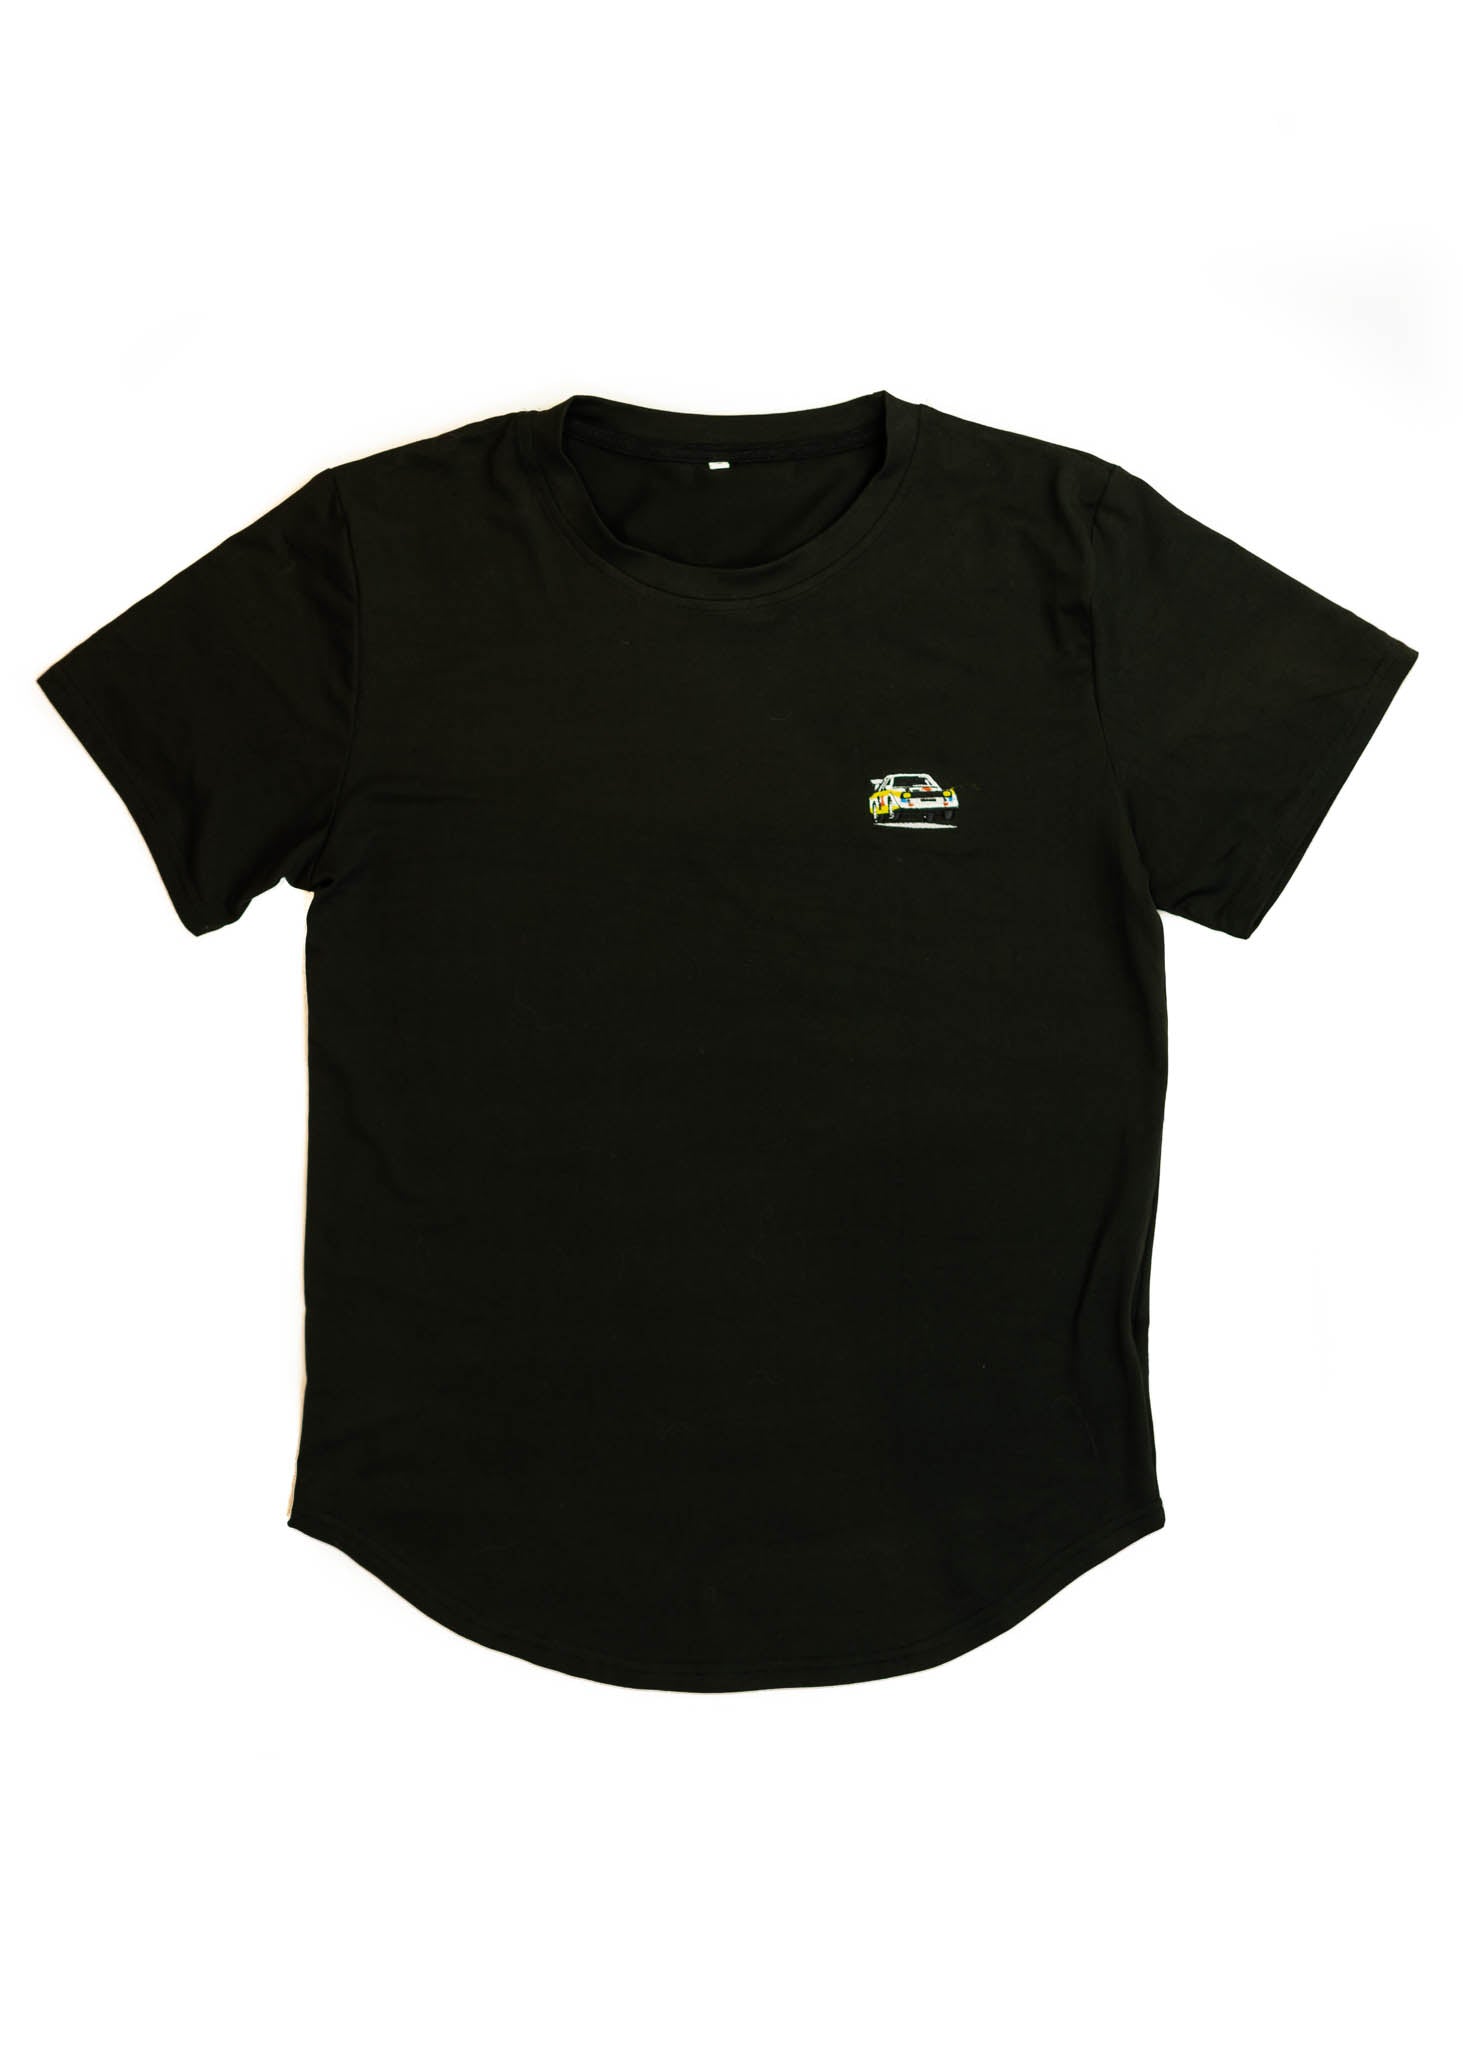 A black Audi t-shirt for men. Photo is a front view of the shirt with an embroidered Group B Audi Sport Quattro S1. Fabric composition is a polyester, and cotton mix. The material is very soft, stretchy, non-transparent. The style of this shirt is short sleeve, with a crewneck neckline.